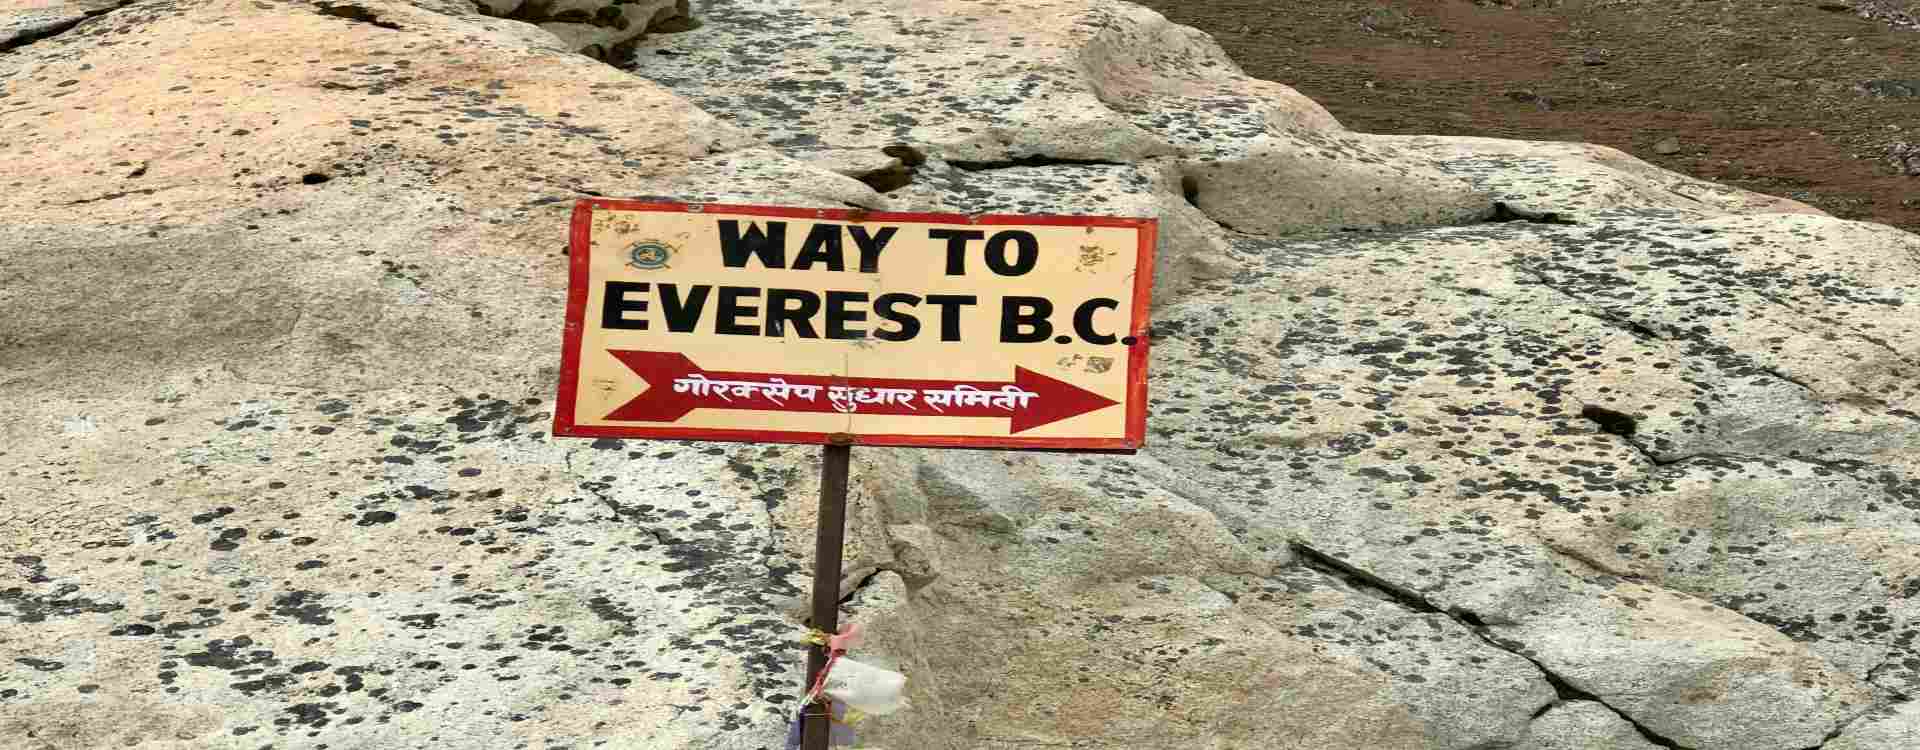 The Ultimate Guide to Everest base Camp: Your complete itinerary